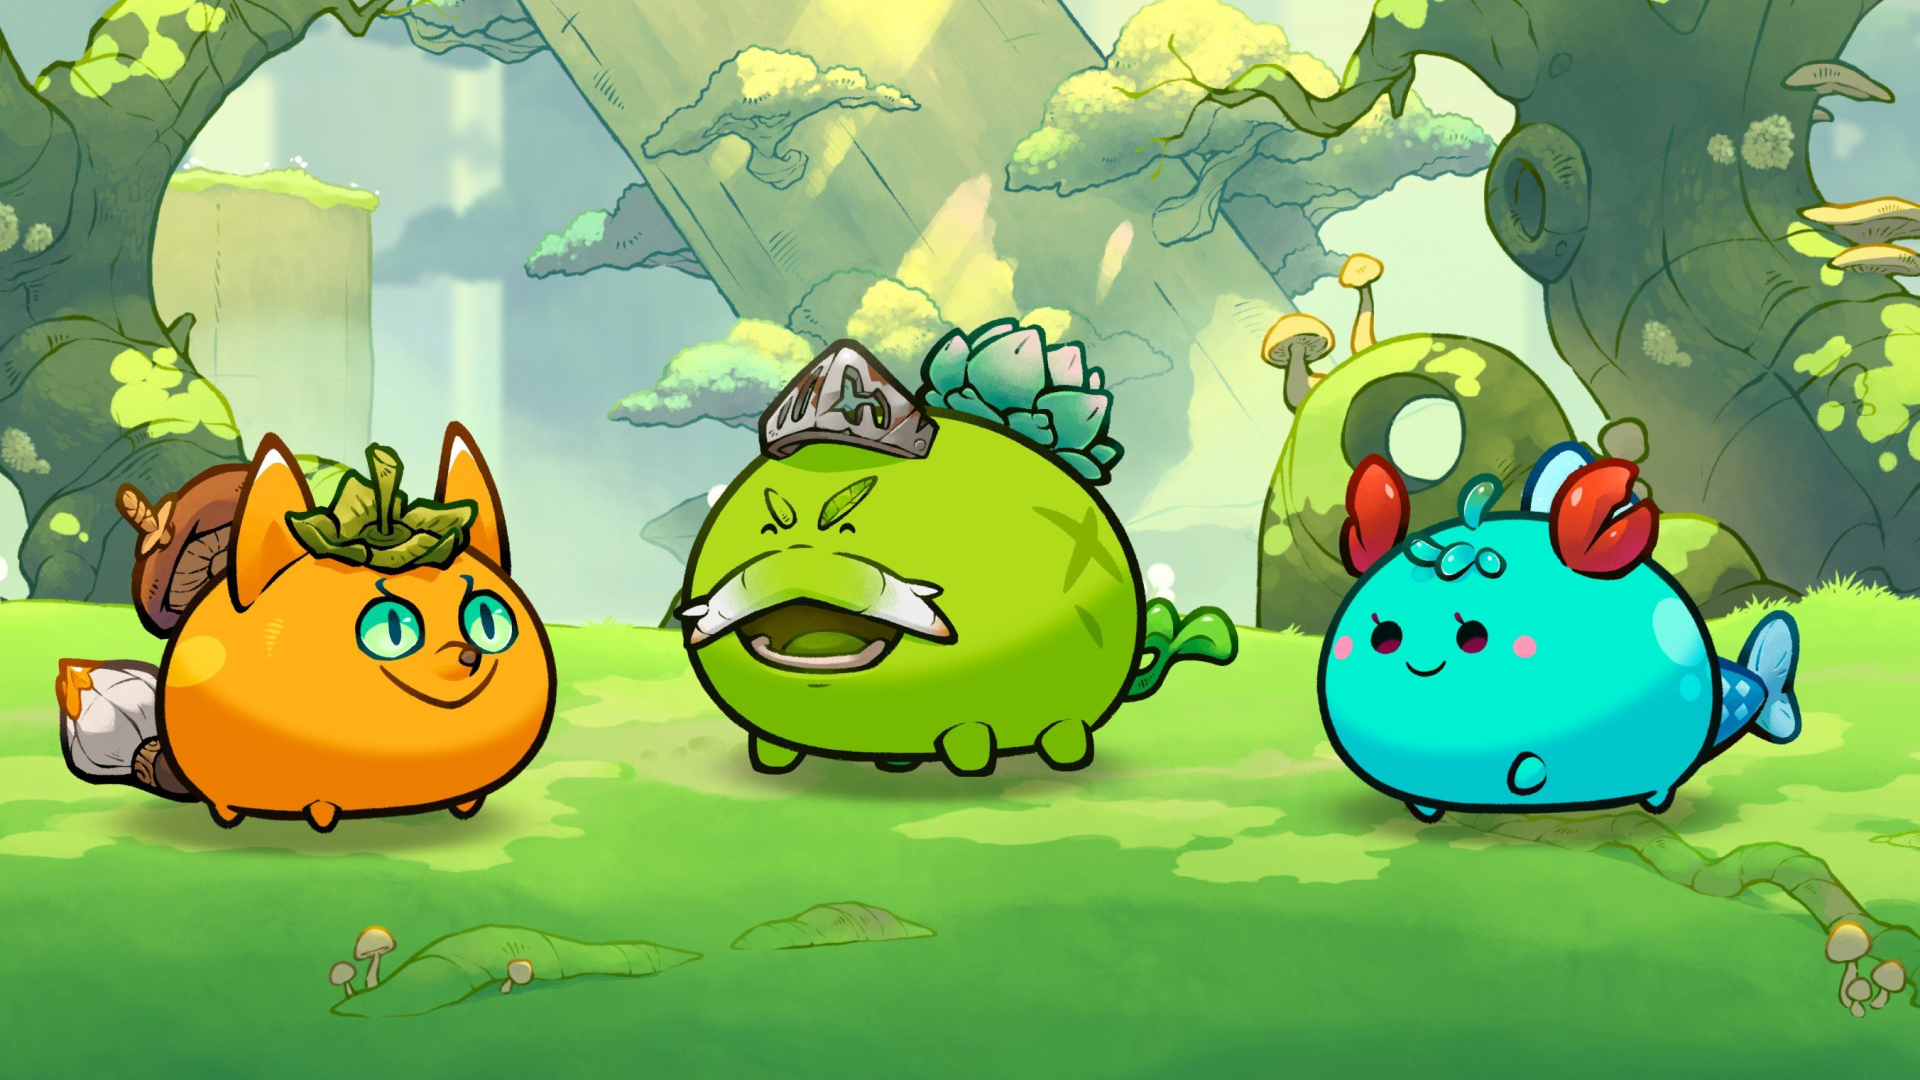 Team of three Axie Infinity creatures: orange, green, and turquoise